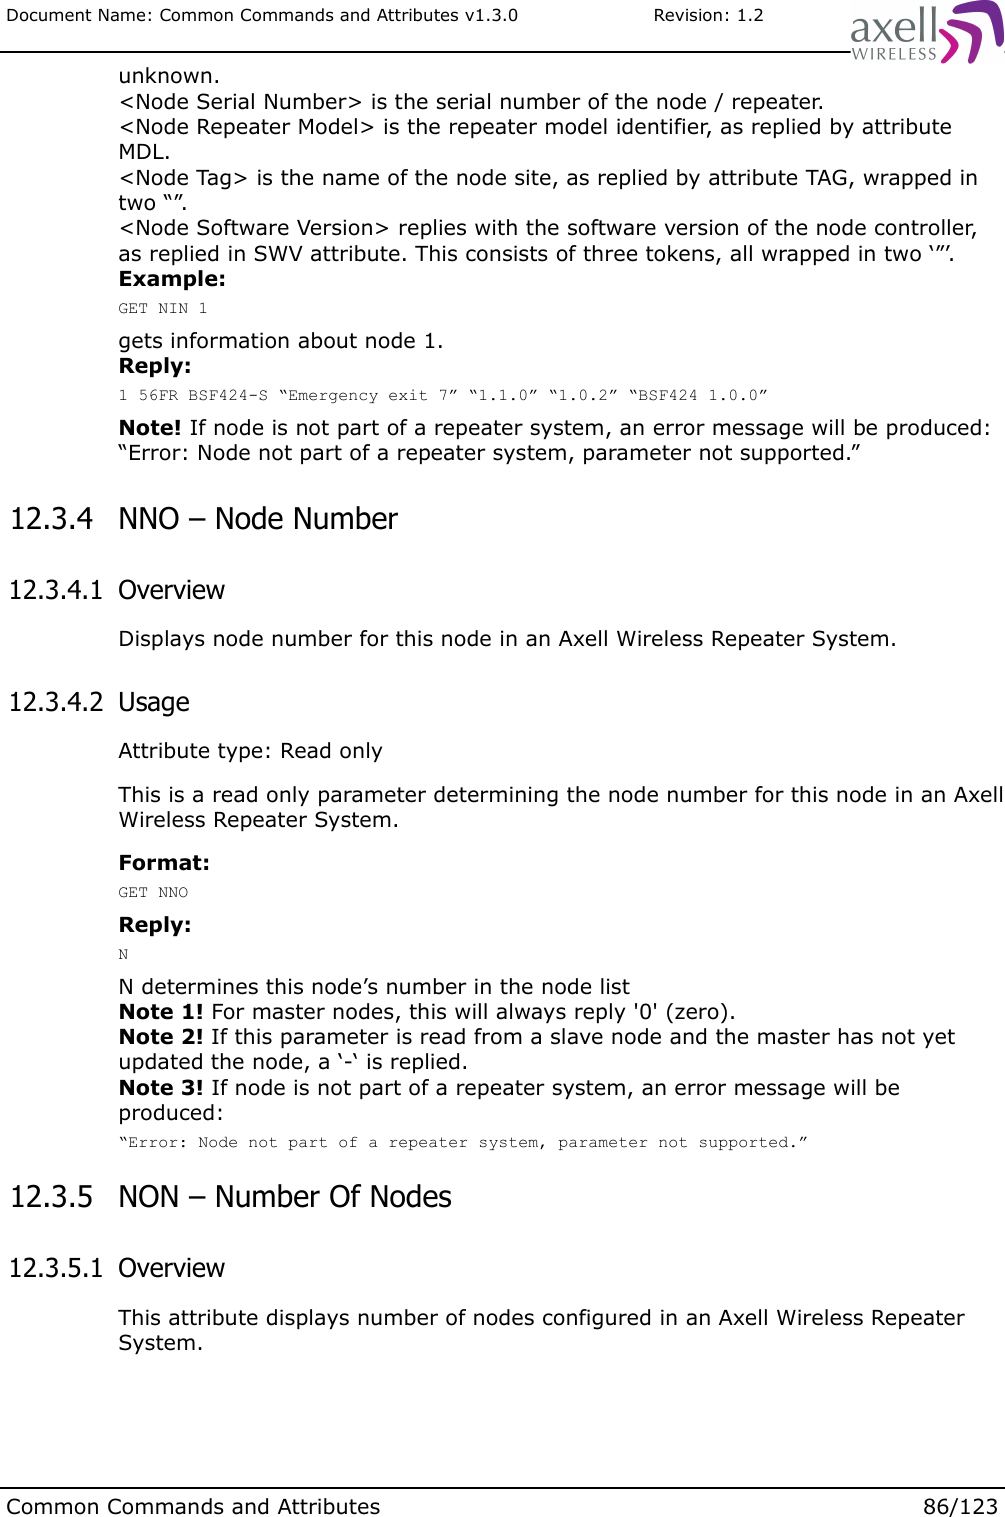 Document Name: Common Commands and Attributes v1.3.0                       Revision: 1.2unknown.&lt;Node Serial Number&gt; is the serial number of the node / repeater.&lt;Node Repeater Model&gt; is the repeater model identifier, as replied by attribute MDL.&lt;Node Tag&gt; is the name of the node site, as replied by attribute TAG, wrapped in two “”.&lt;Node Software Version&gt; replies with the software version of the node controller, as replied in SWV attribute. This consists of three tokens, all wrapped in two ‘”’.Example:GET NIN 1gets information about node 1.Reply:1 56FR BSF424-S “Emergency exit 7” “1.1.0” “1.0.2” “BSF424 1.0.0”Note! If node is not part of a repeater system, an error message will be produced:“Error: Node not part of a repeater system, parameter not supported.” 12.3.4  NNO – Node Number 12.3.4.1  OverviewDisplays node number for this node in an Axell Wireless Repeater System. 12.3.4.2  UsageAttribute type: Read onlyThis is a read only parameter determining the node number for this node in an Axell Wireless Repeater System.Format:GET NNOReply:NN determines this node’s number in the node listNote 1! For master nodes, this will always reply &apos;0&apos; (zero).Note 2! If this parameter is read from a slave node and the master has not yet updated the node, a ‘-‘ is replied.Note 3! If node is not part of a repeater system, an error message will be produced:“Error: Node not part of a repeater system, parameter not supported.” 12.3.5  NON – Number Of Nodes 12.3.5.1  OverviewThis attribute displays number of nodes configured in an Axell Wireless Repeater System.Common Commands and Attributes 86/123